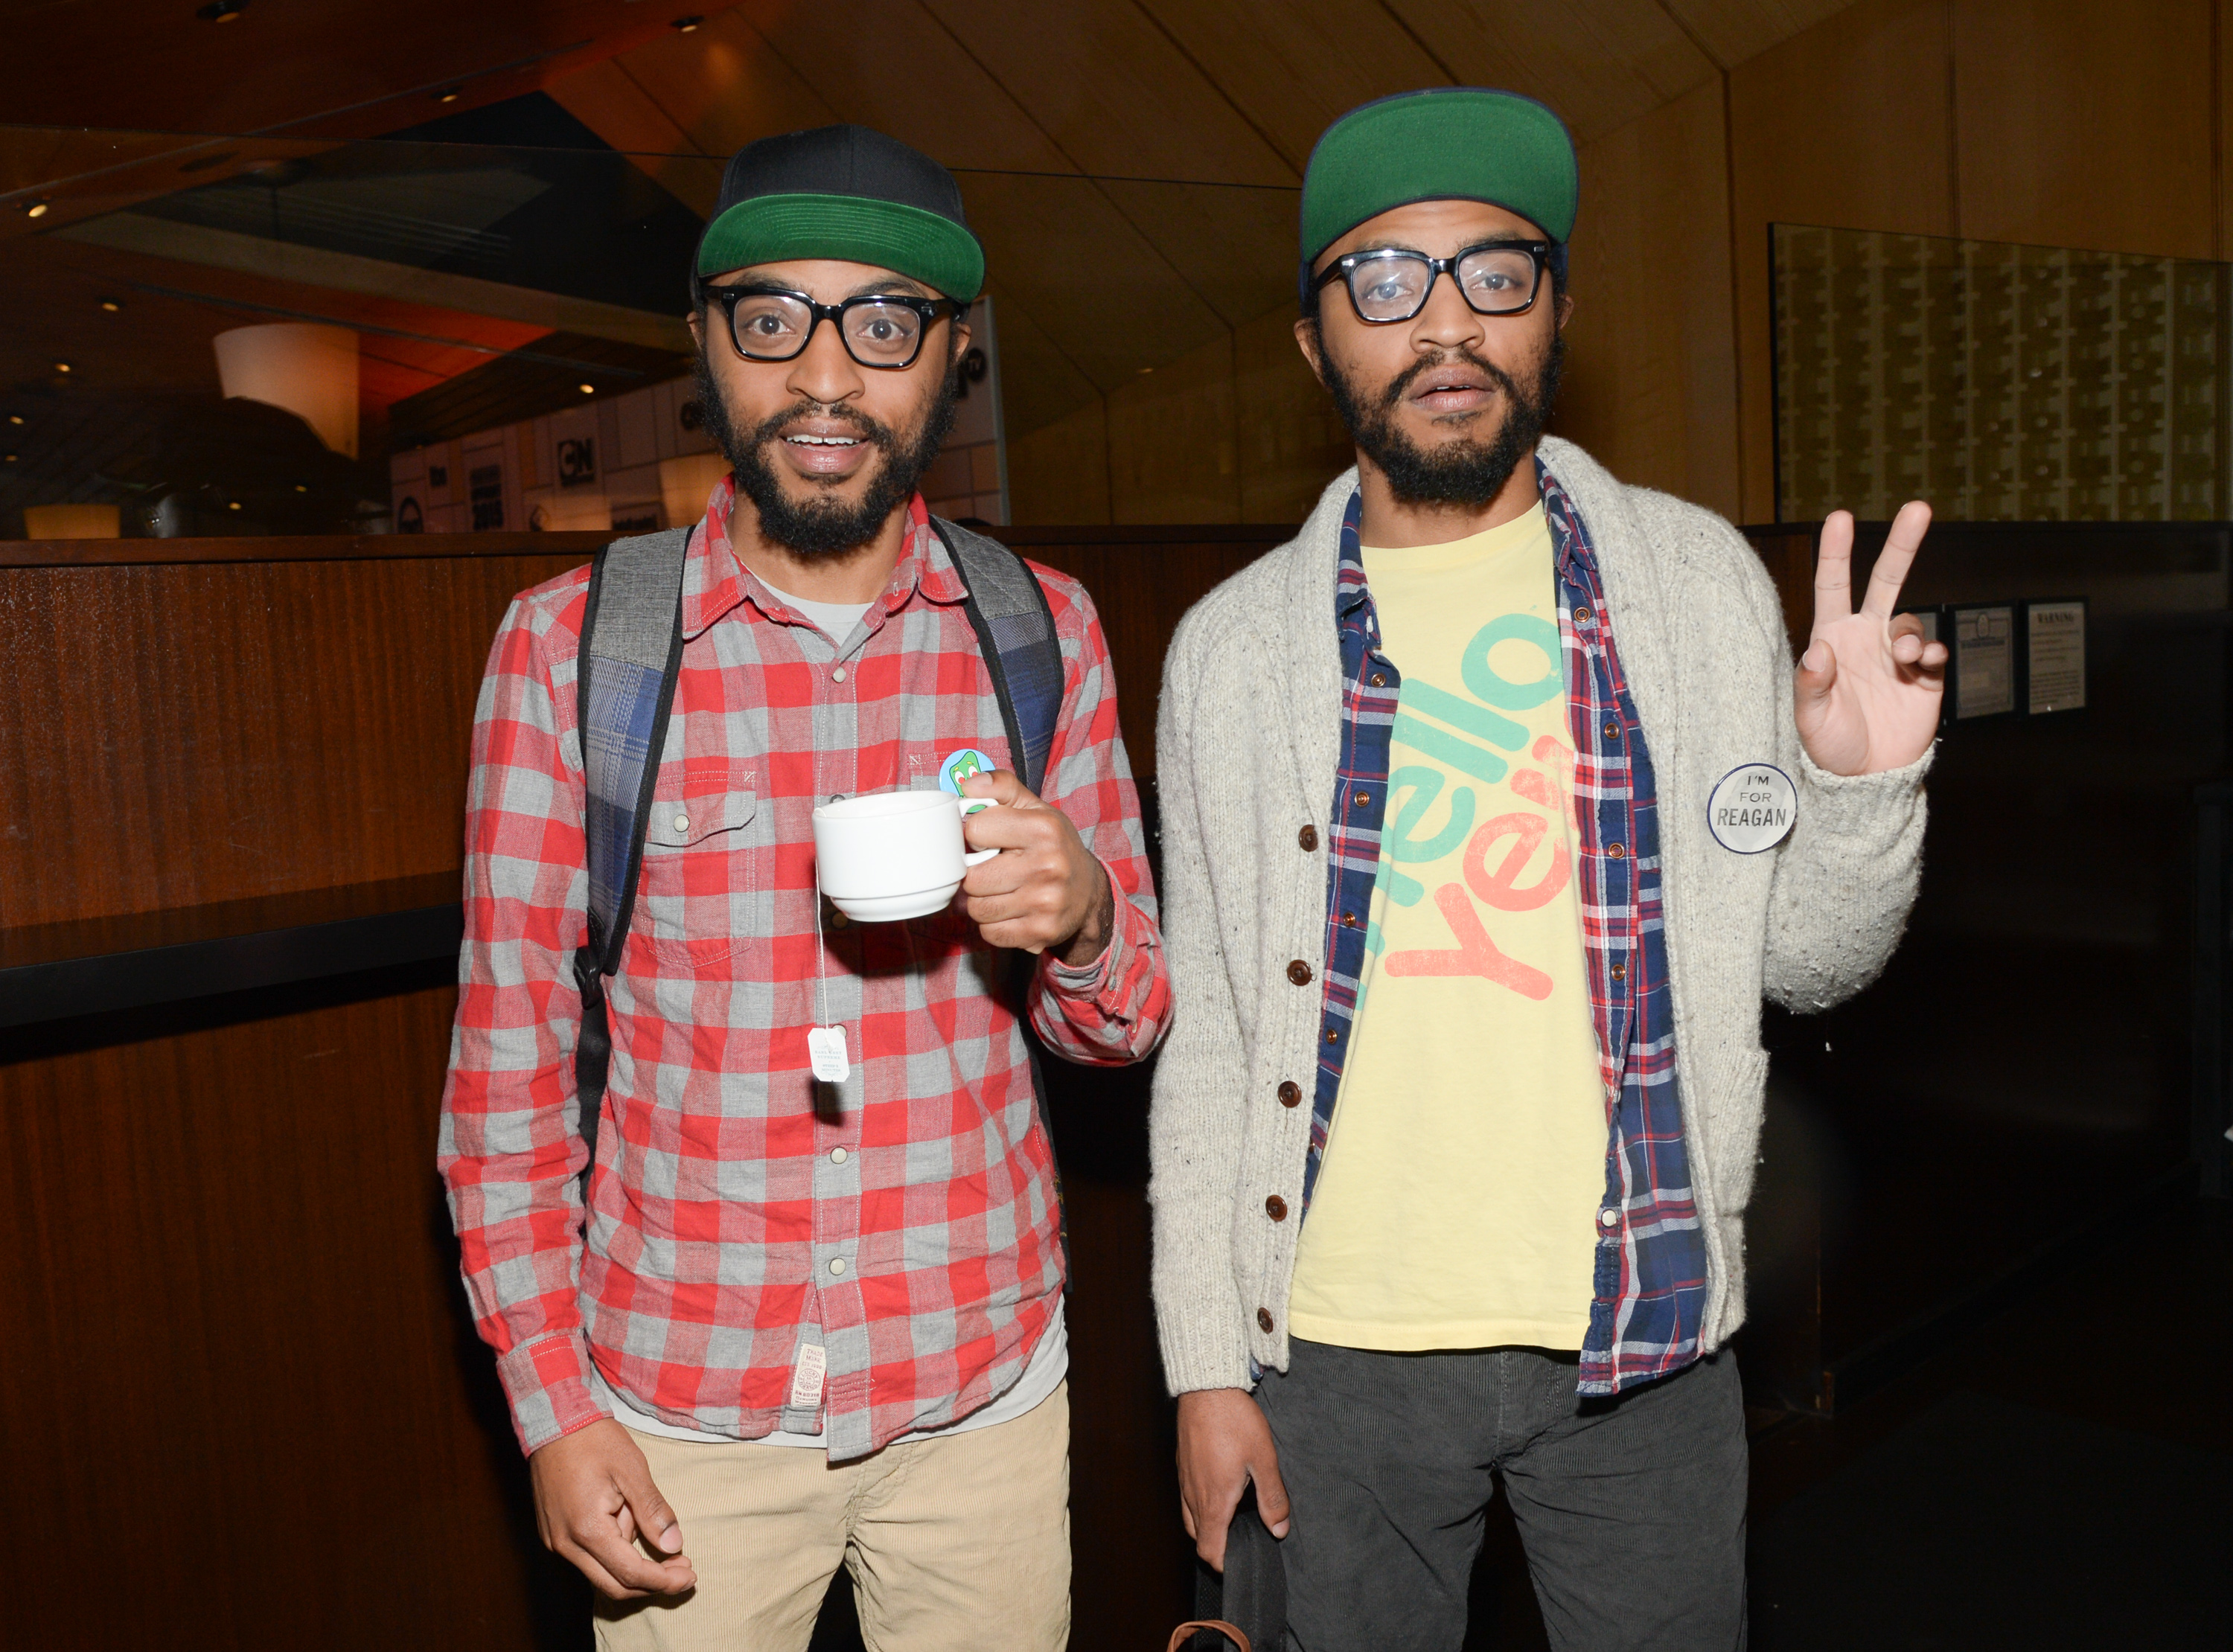 Kenny Lucas, left, and Keith Lucas attend the Turner Network 2015 Upfront at Madison Square Garden on Wednesday, May 13, 2015, in New York. (Photo by Evan Agostini/Invision/AP)